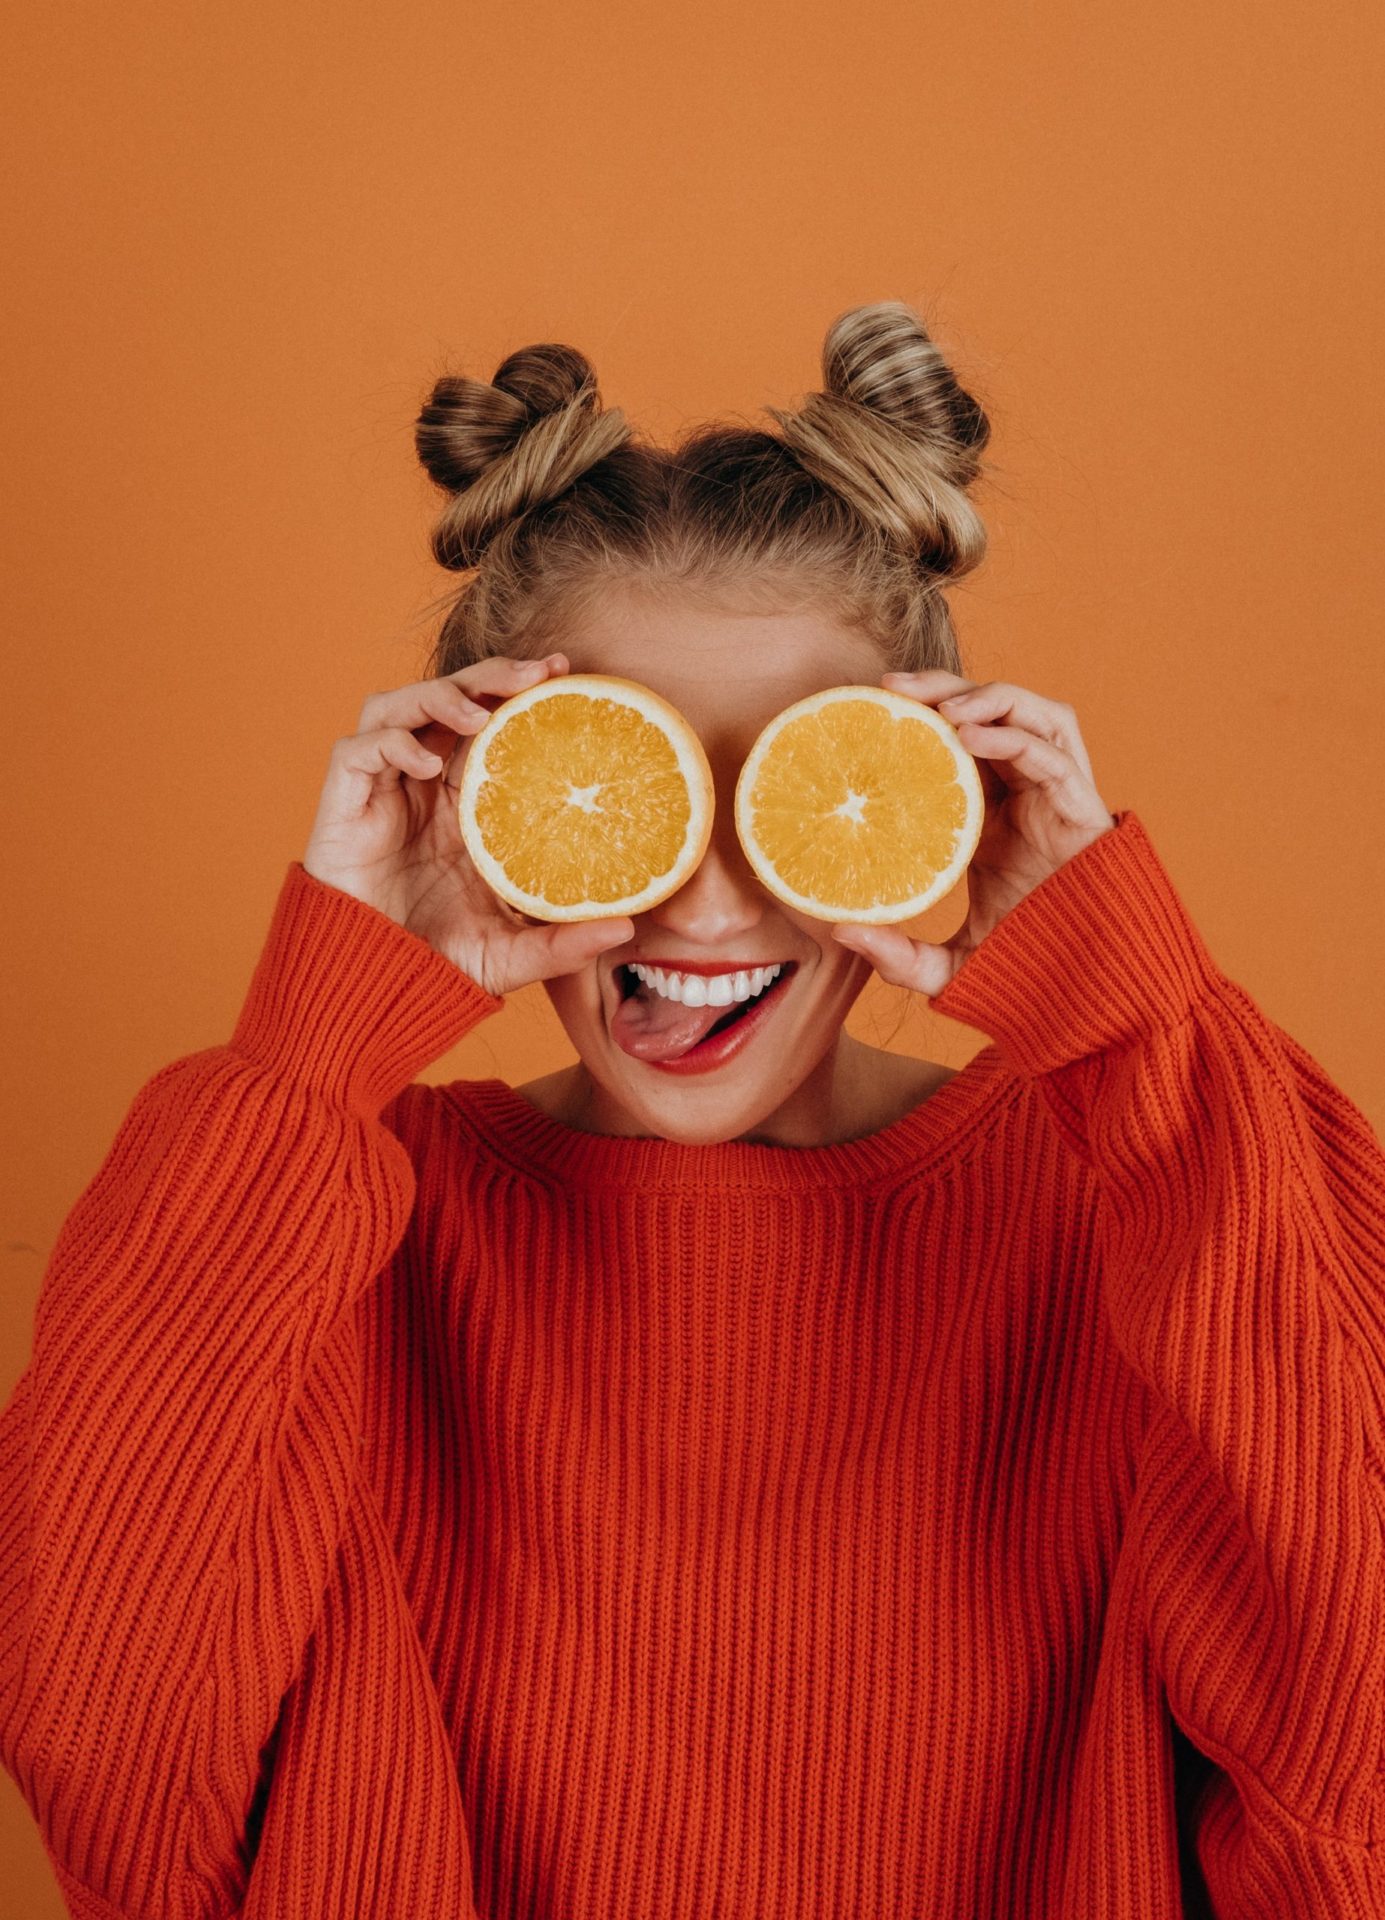 Woman in red knit sweater with bunches in her hair holds orange halves over her eyes while sticking out her tongue. Photo by Noah Buscher on Unsplash.